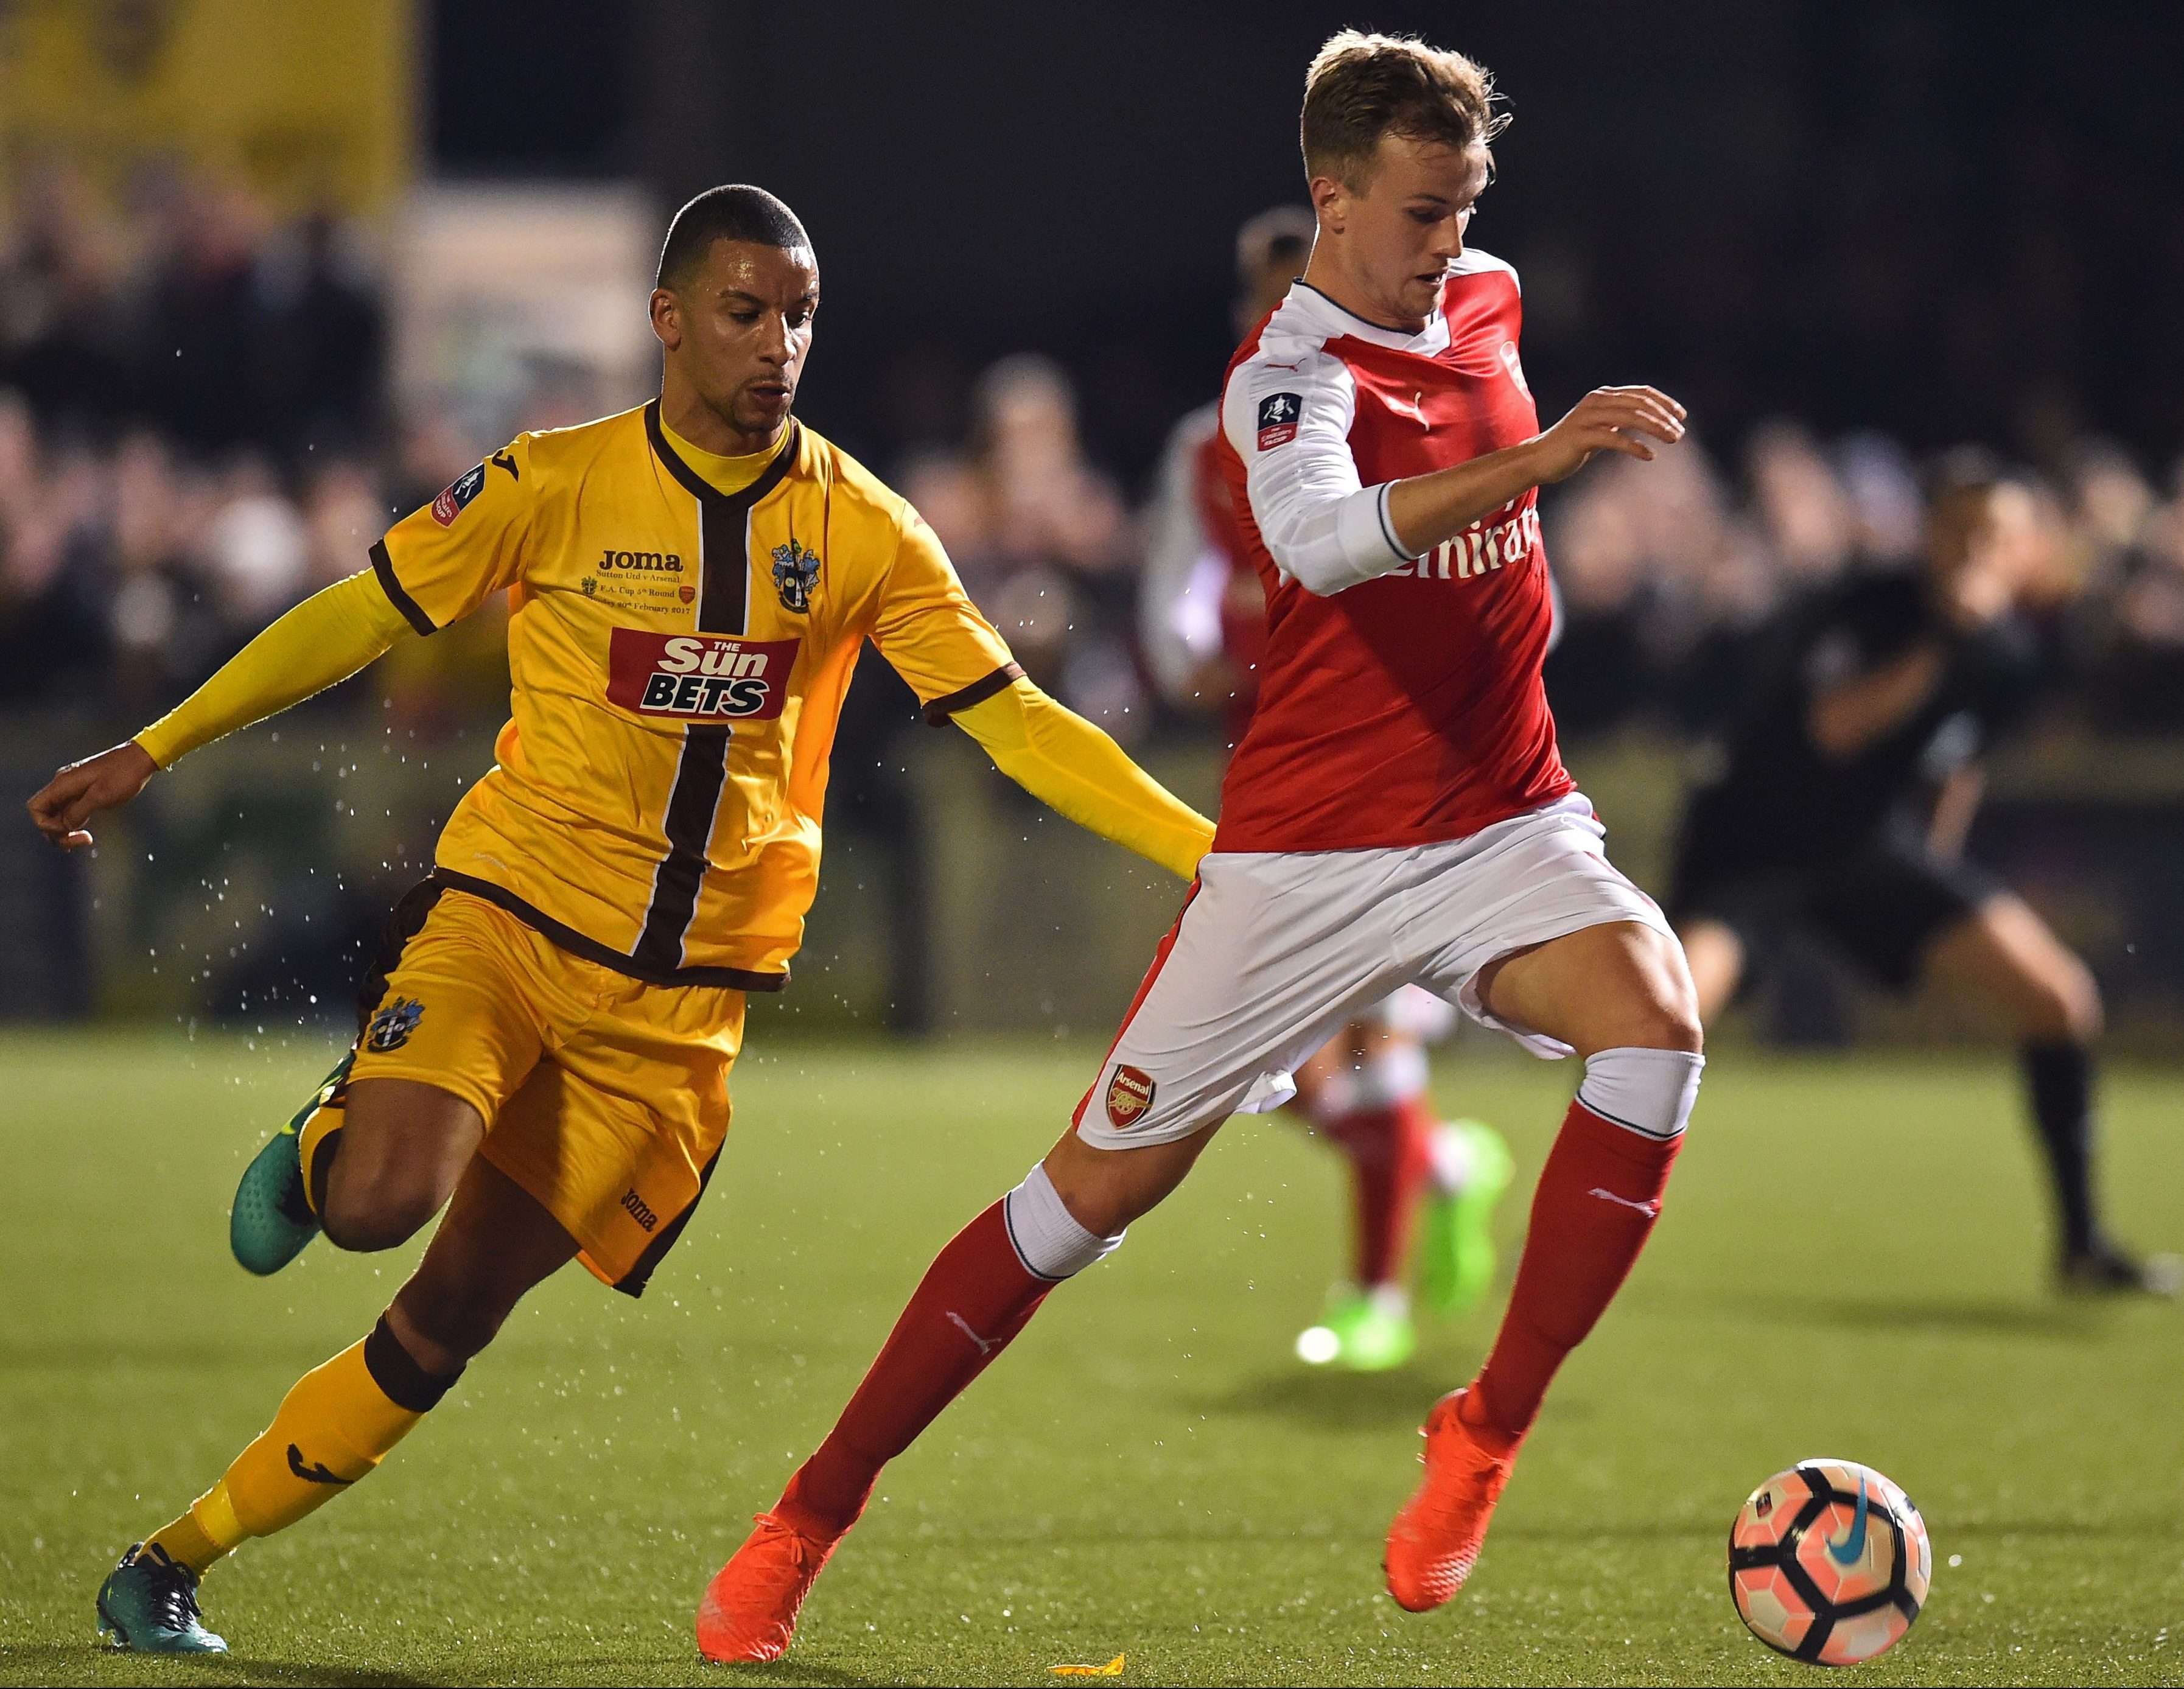 In 2017 Arsenal played Sutton United on their synthetic turf in the FA Cup